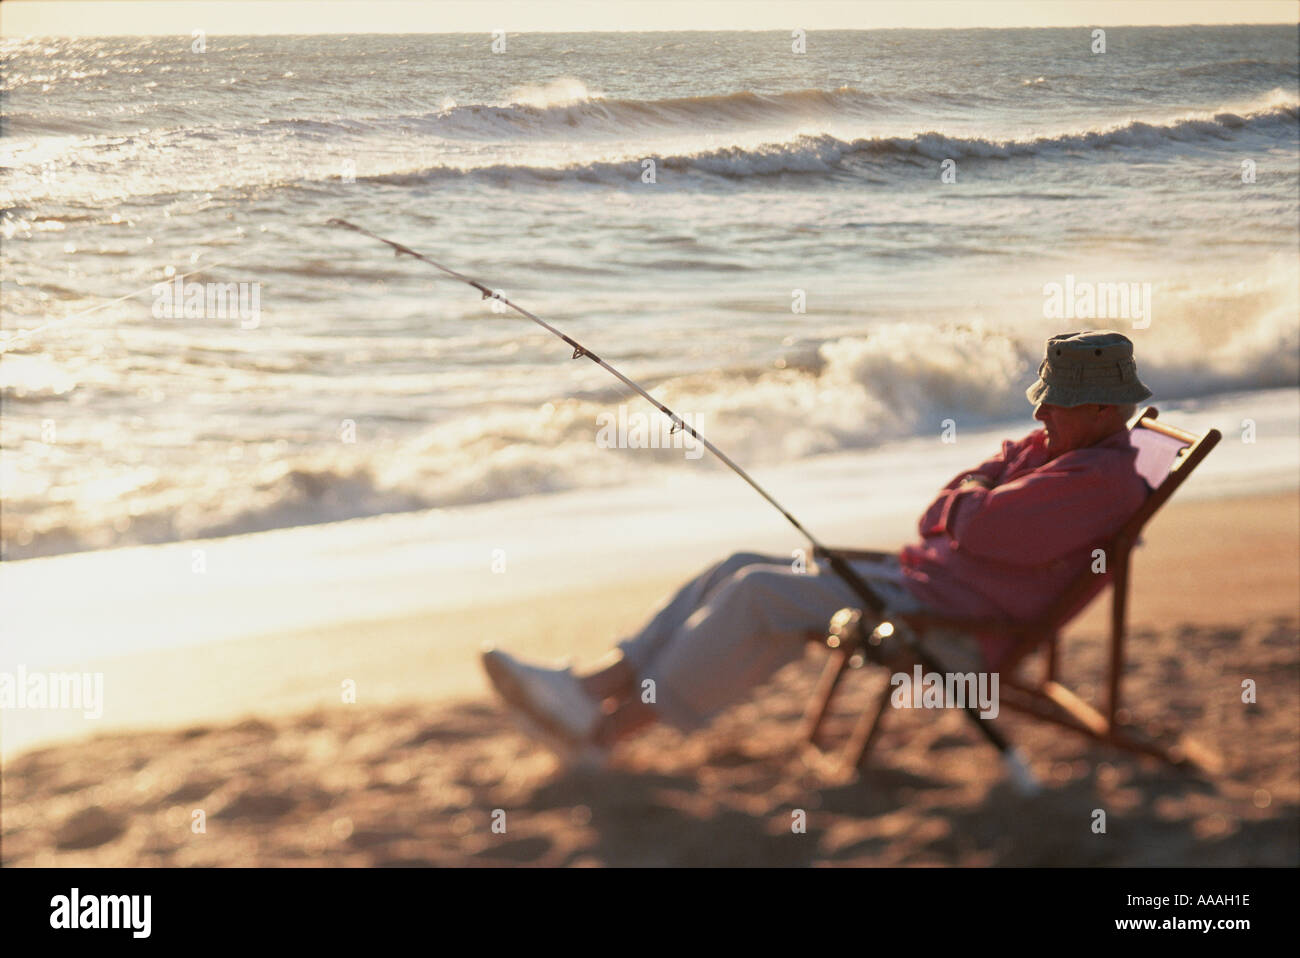 Senior man sitting on a beach chair with a fishing rod Stock Photo